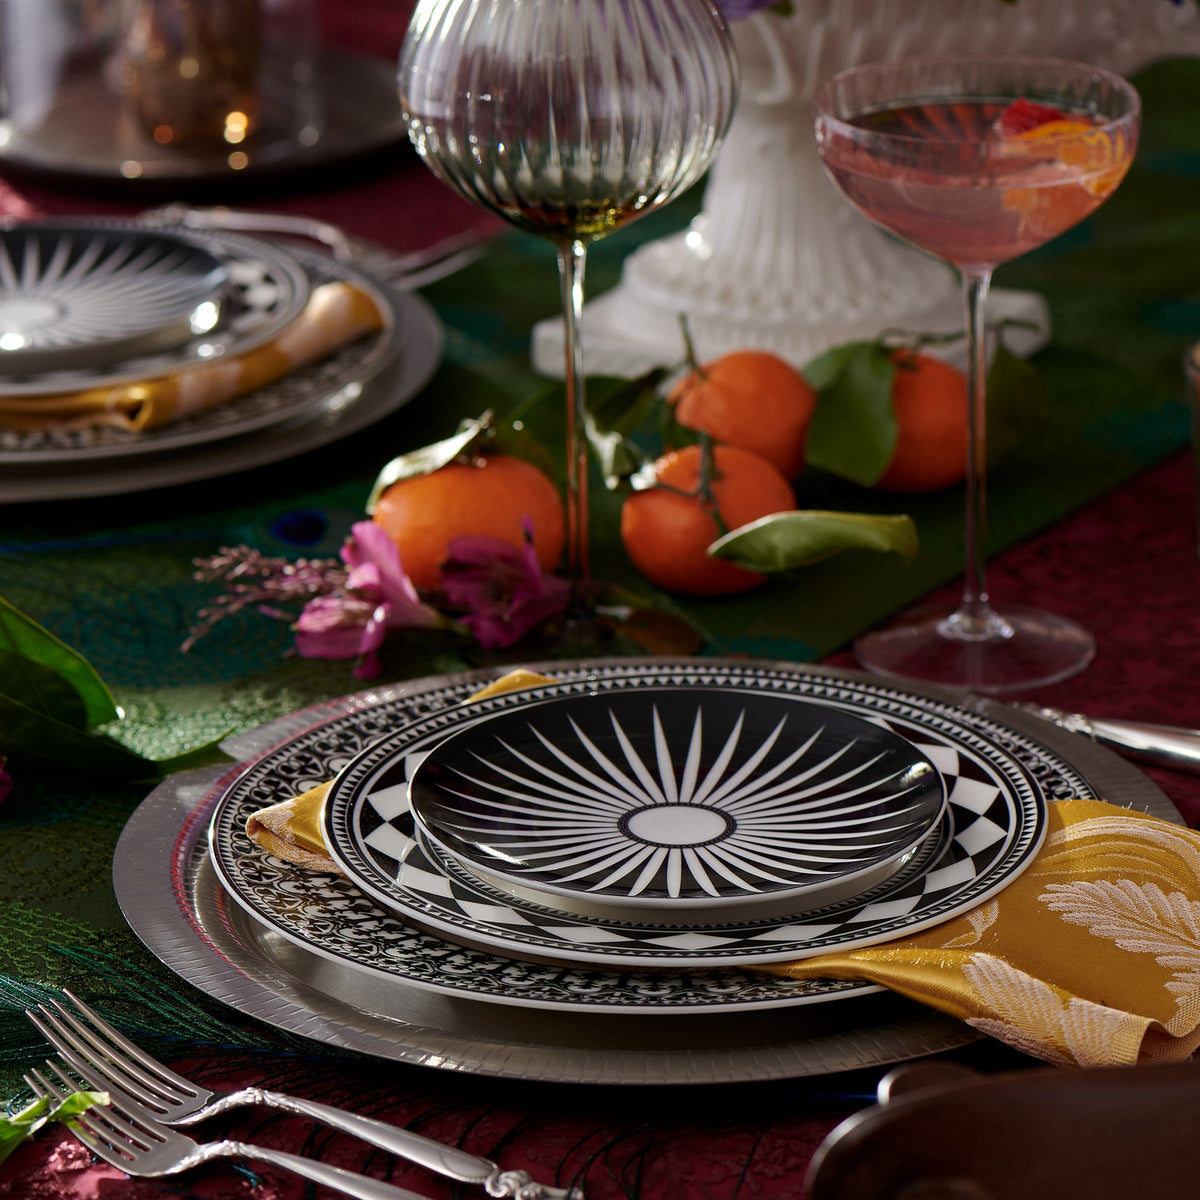 A set dining table with hand decorated details on Caskata Artisanal Home Casablanca Rimmed Dinner Plates, placed on golden napkins, crystal glassware, and oranges beside a green table runner and floral centerpieces.